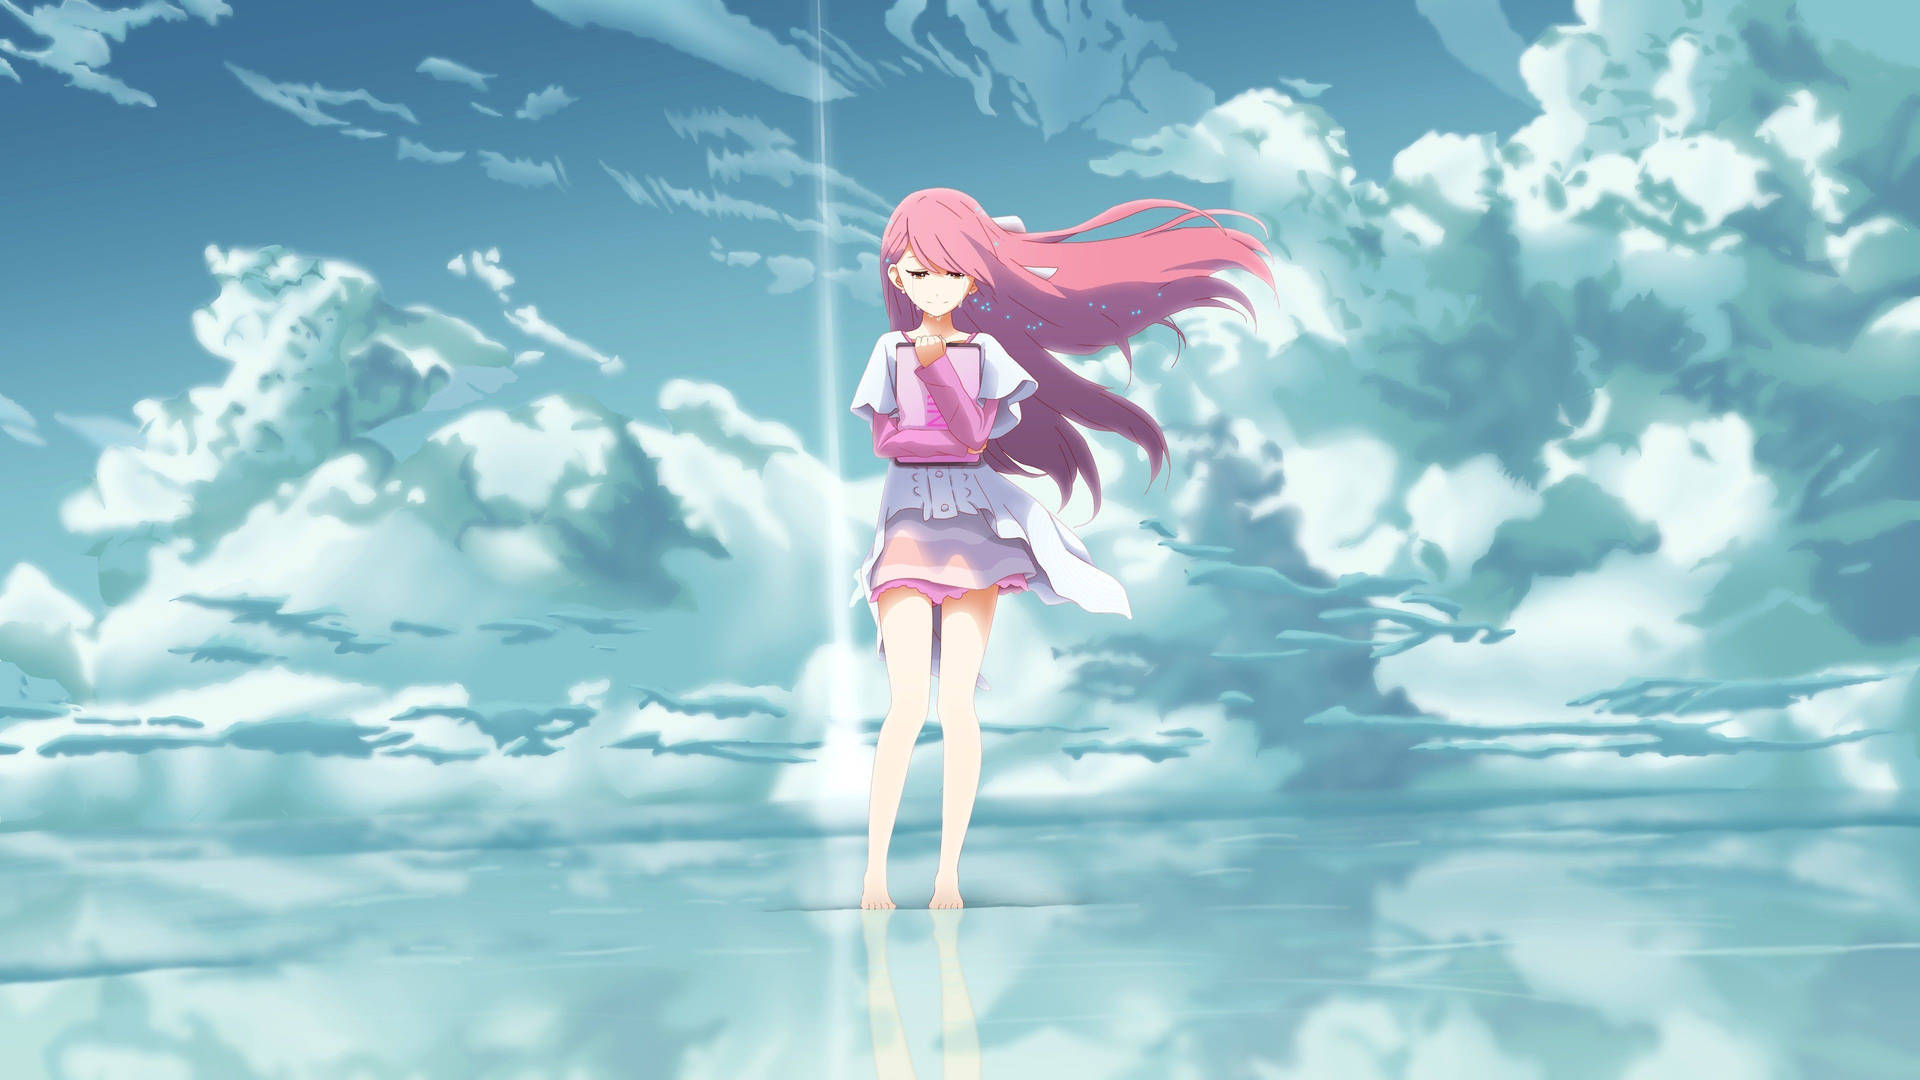 Free Anime Wallpaper Downloads, [5900+] Anime Wallpapers for FREE |  